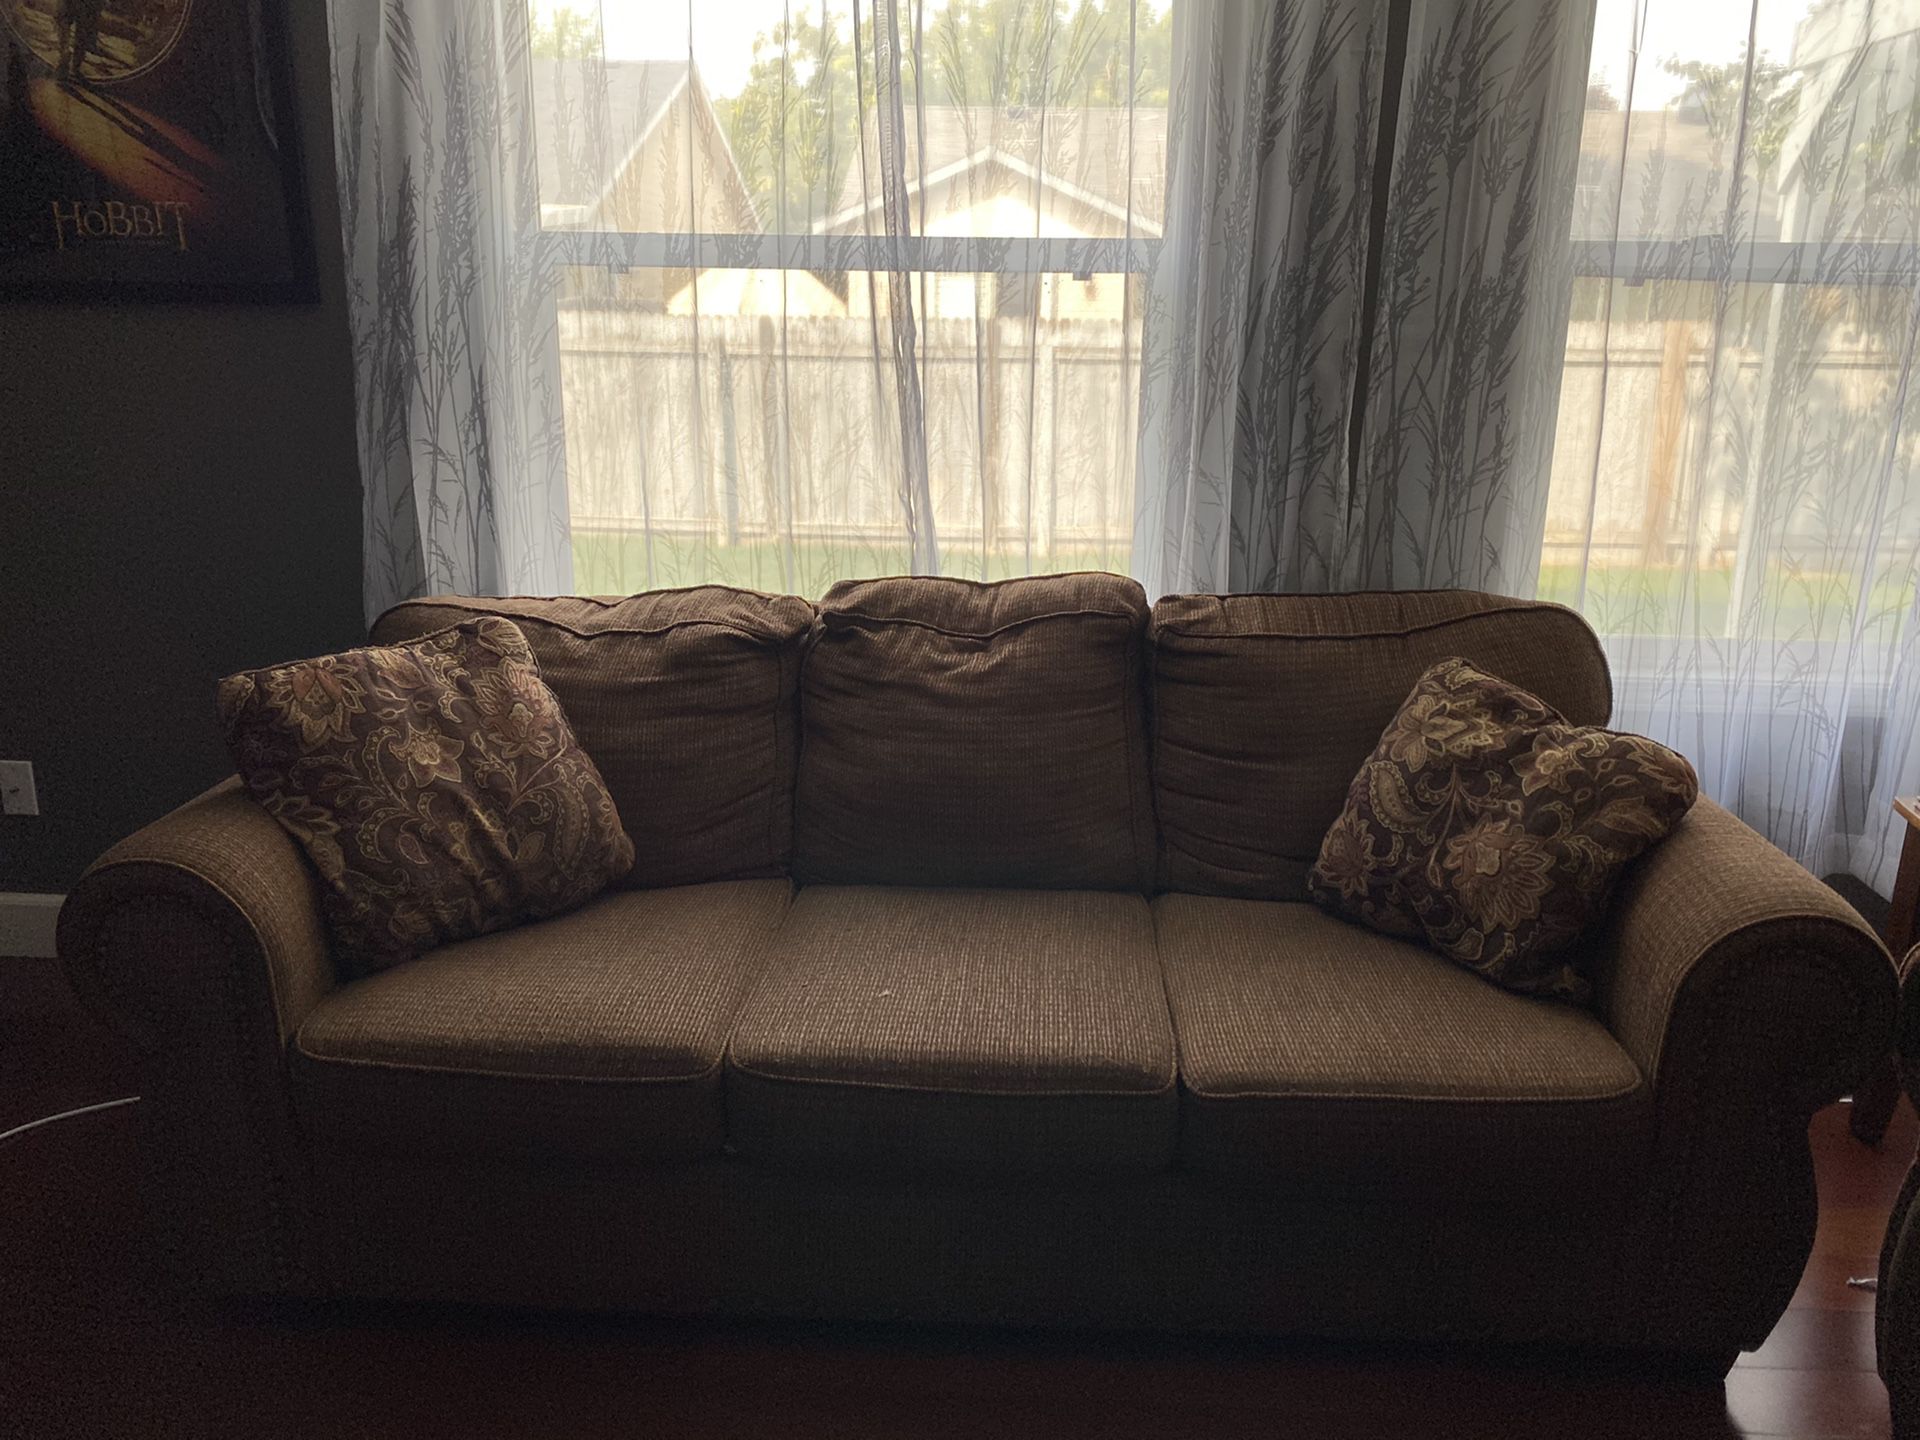 Southport couch/loveseat